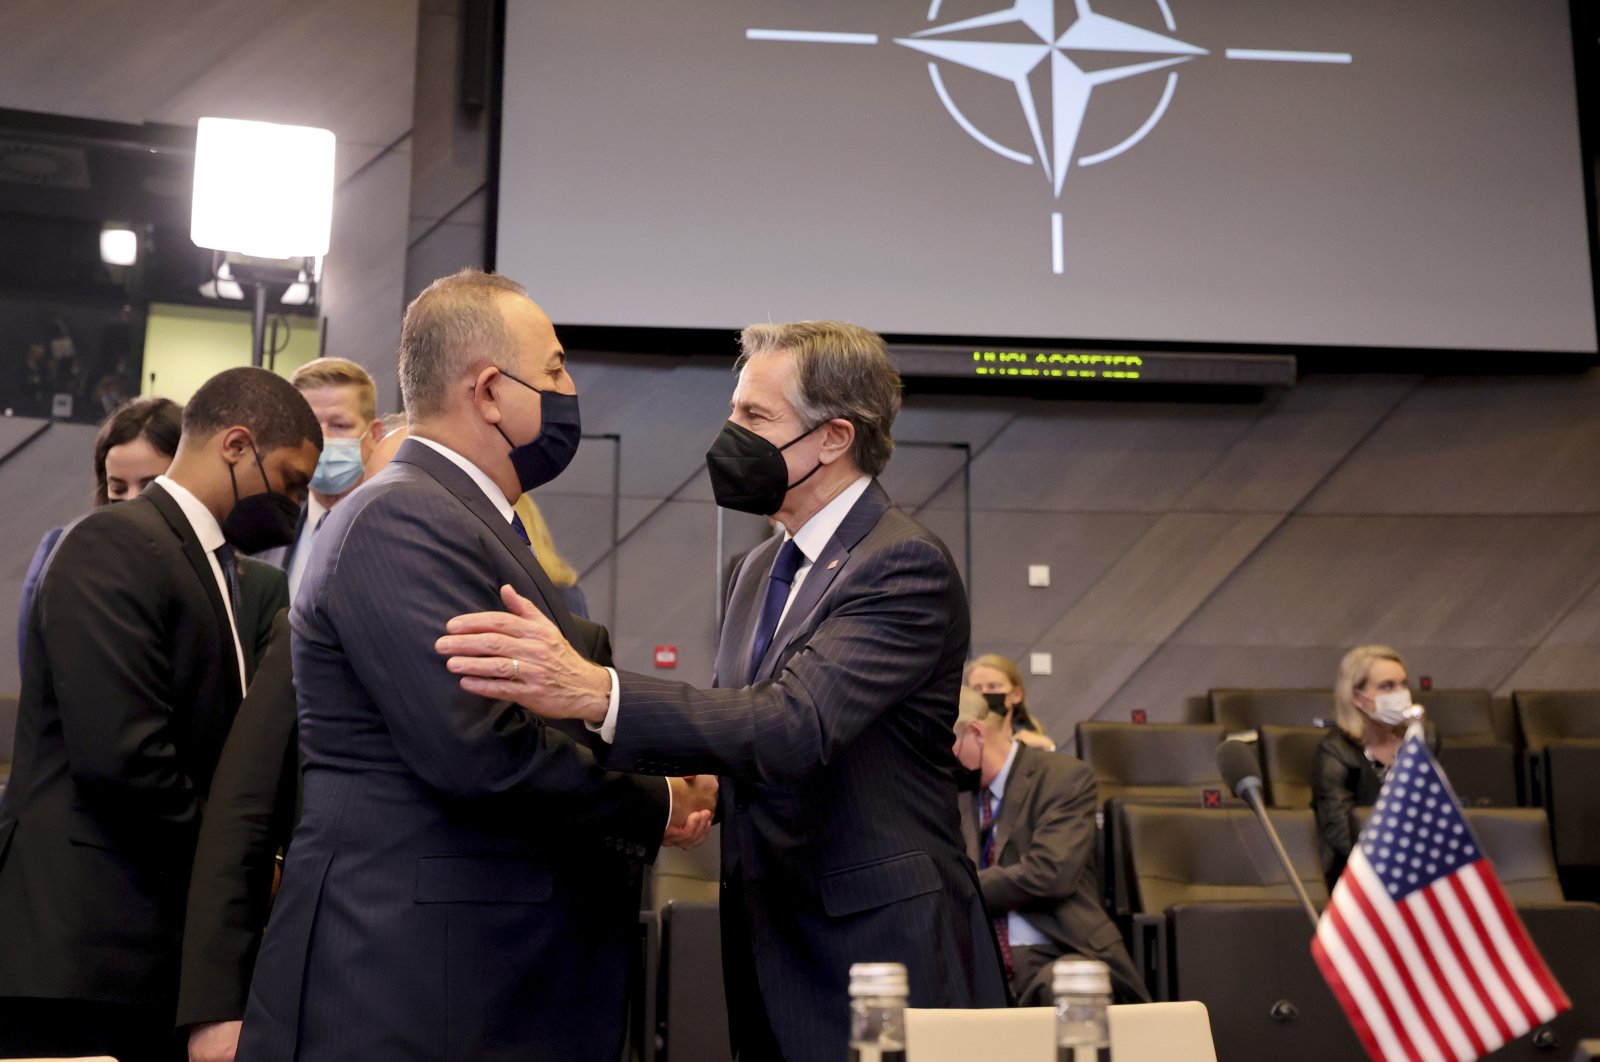 Foreign Minister Mevlüt Çavuşoğlu (L) and U.S. Secretary of State Antony J. Blinken greet each other during an extraordinary NATO foreign ministers meeting at NATO headquarters in Brussels, Belgium, March 4, 2022. (AP Photo)